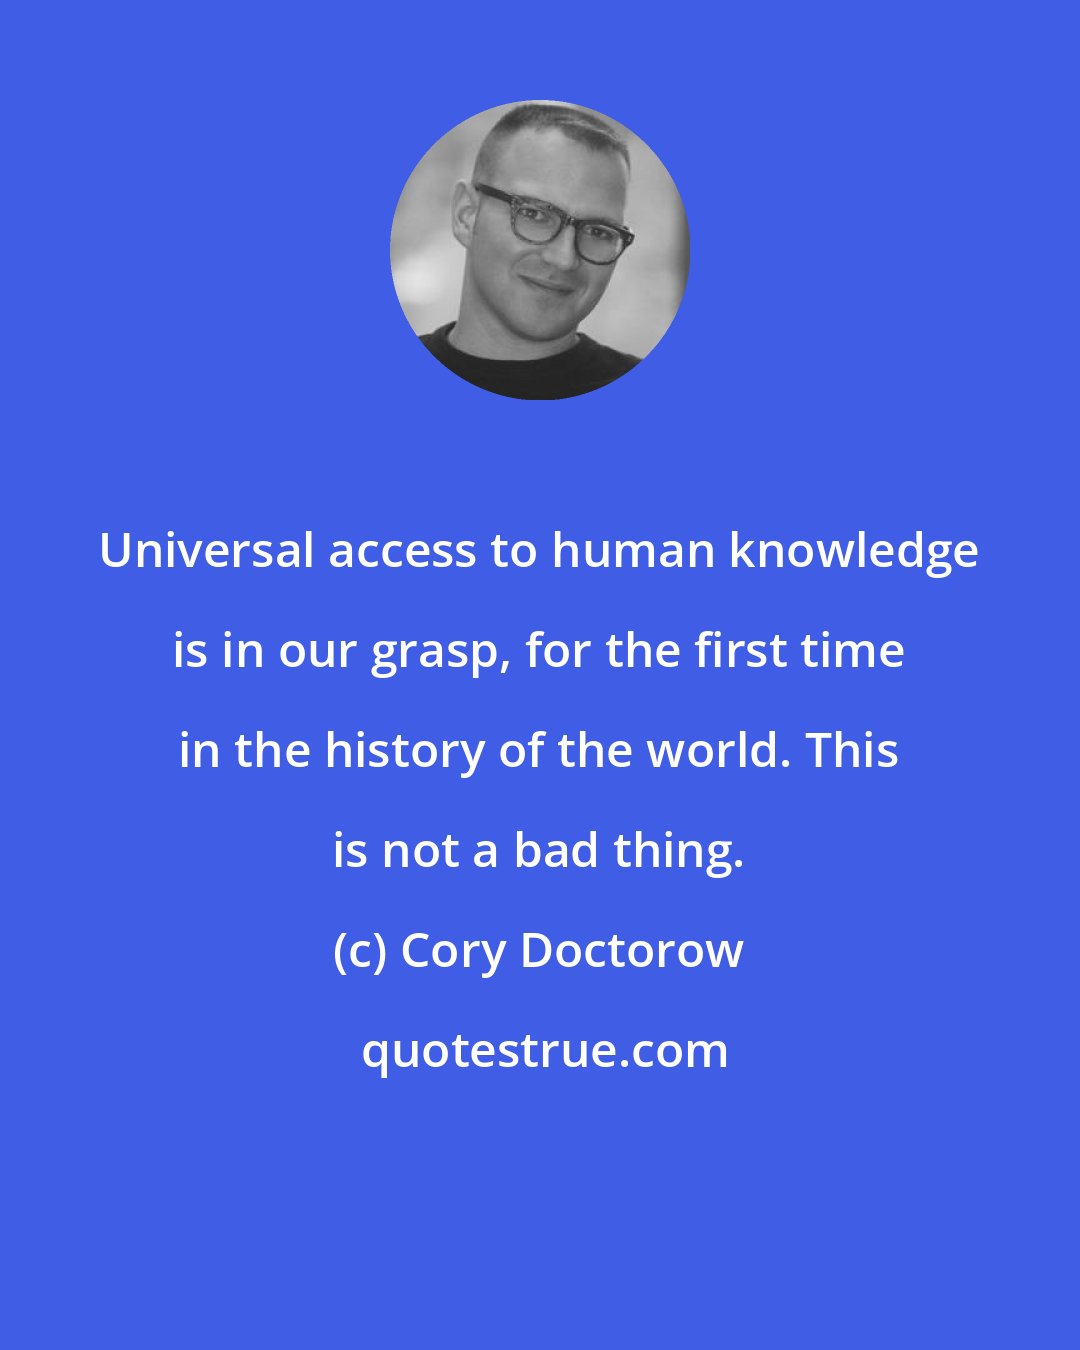 Cory Doctorow: Universal access to human knowledge is in our grasp, for the first time in the history of the world. This is not a bad thing.